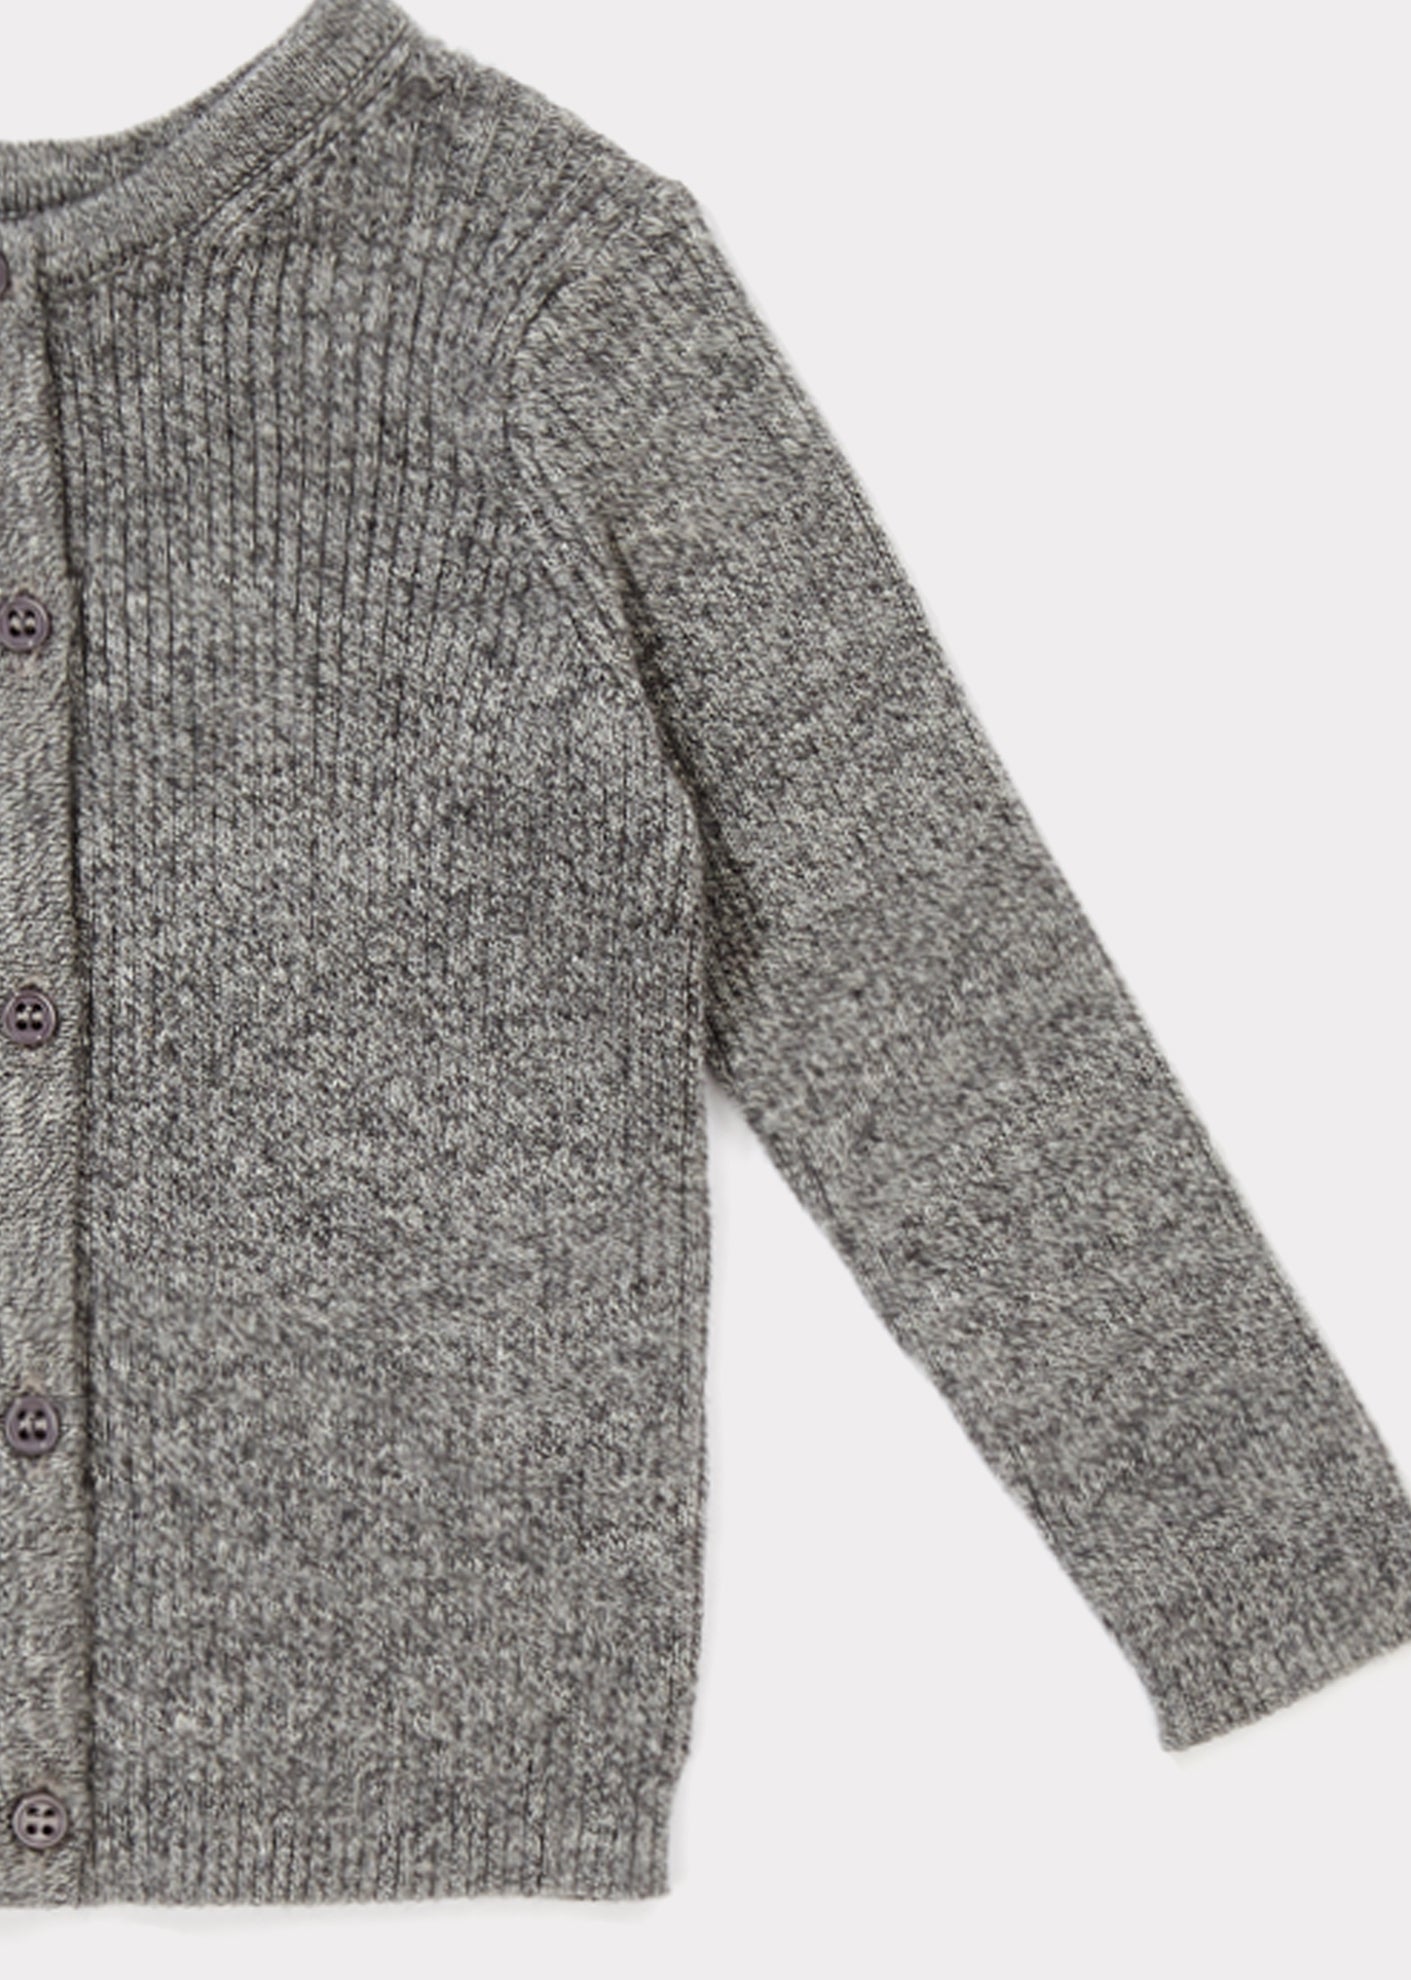 Baby Charcoal Cotton Cardigan